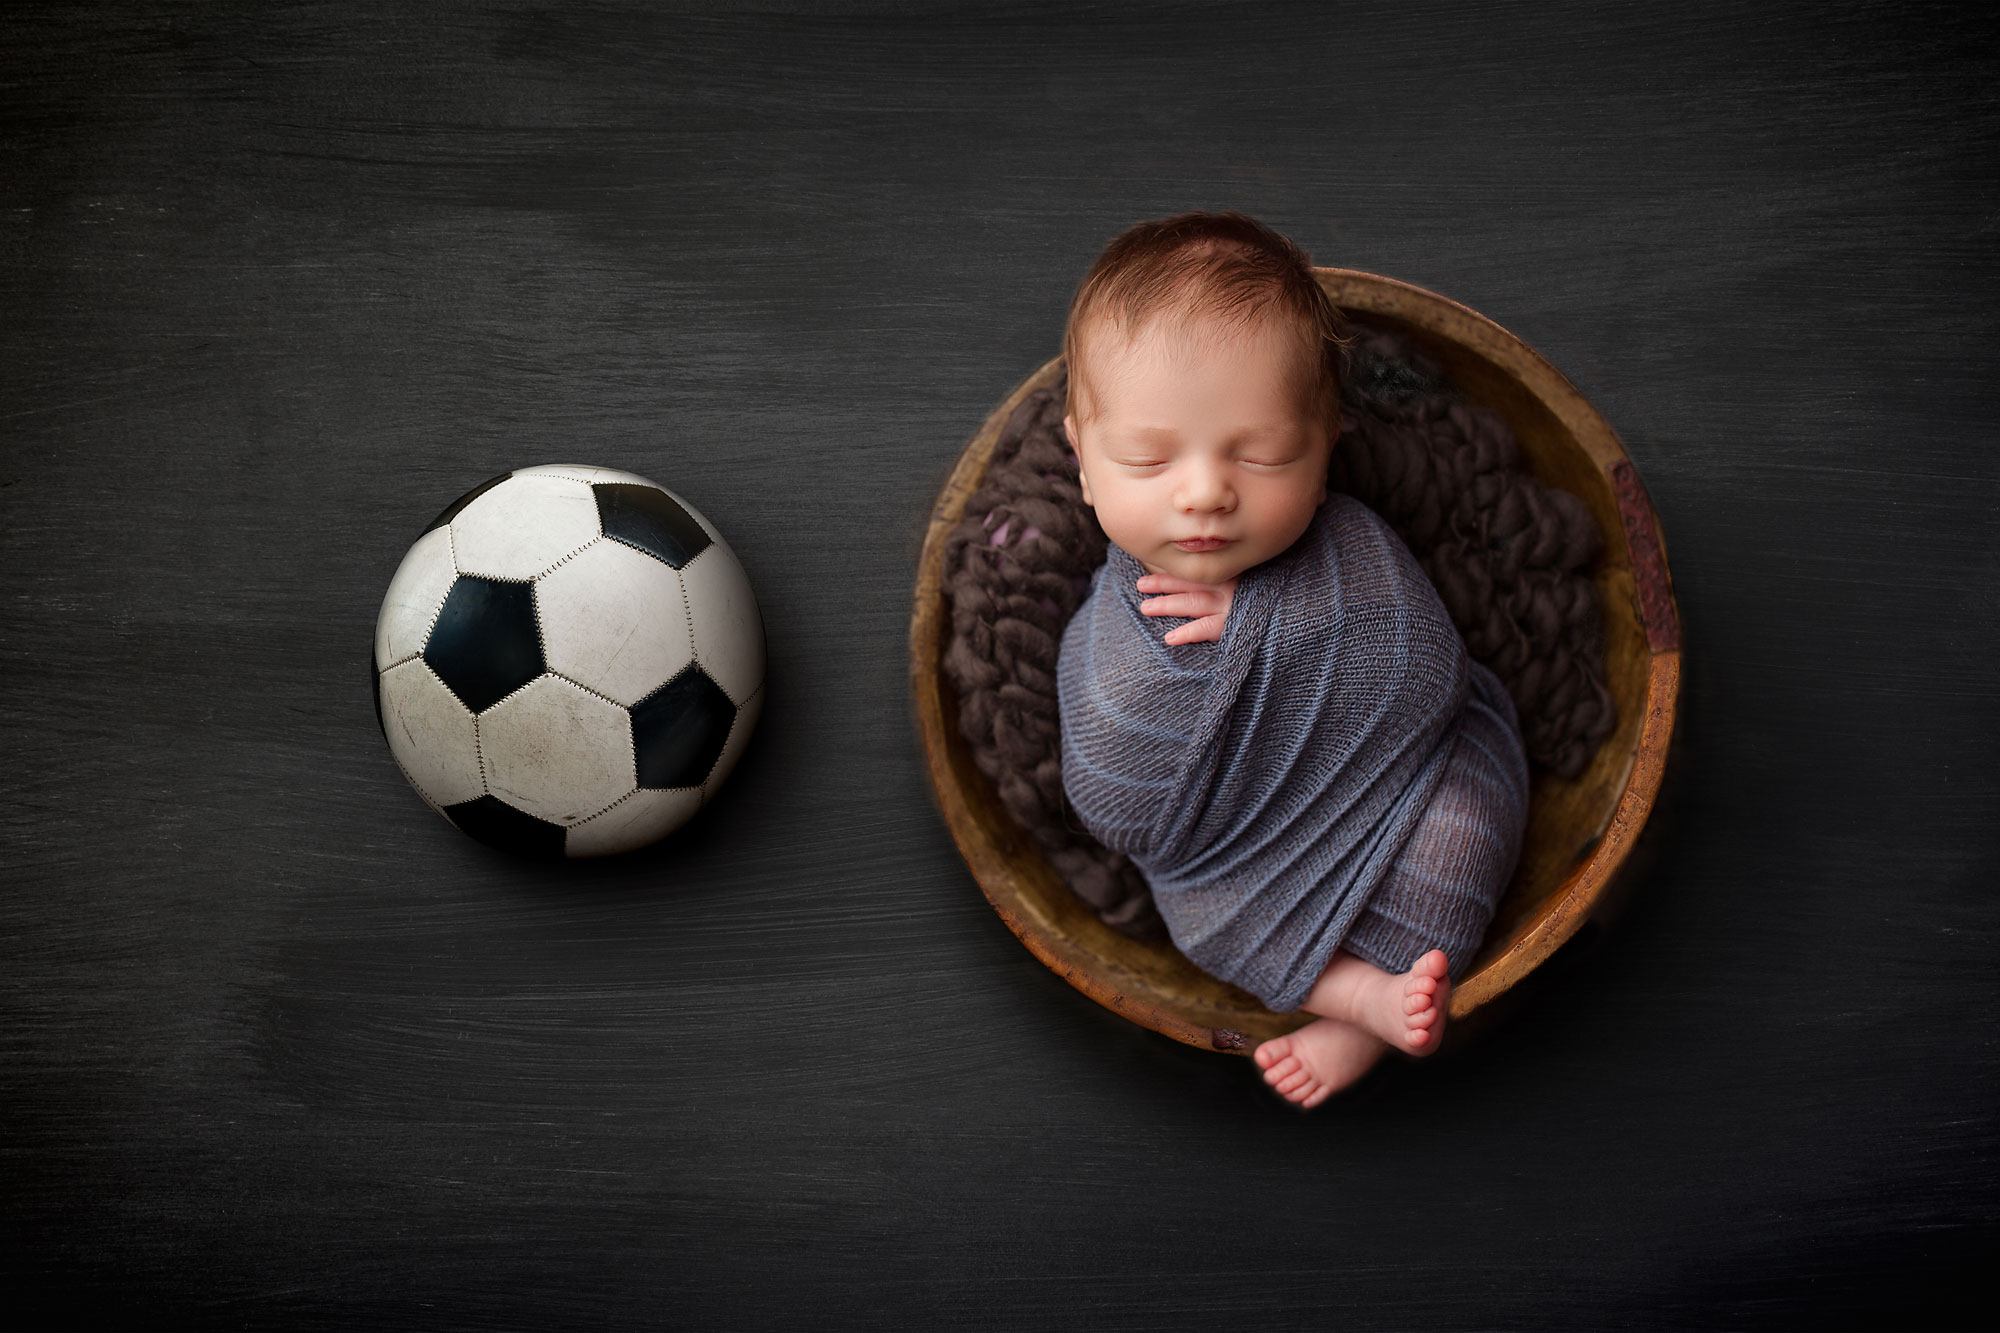 newborn photo ideas for photography session soccer ball 